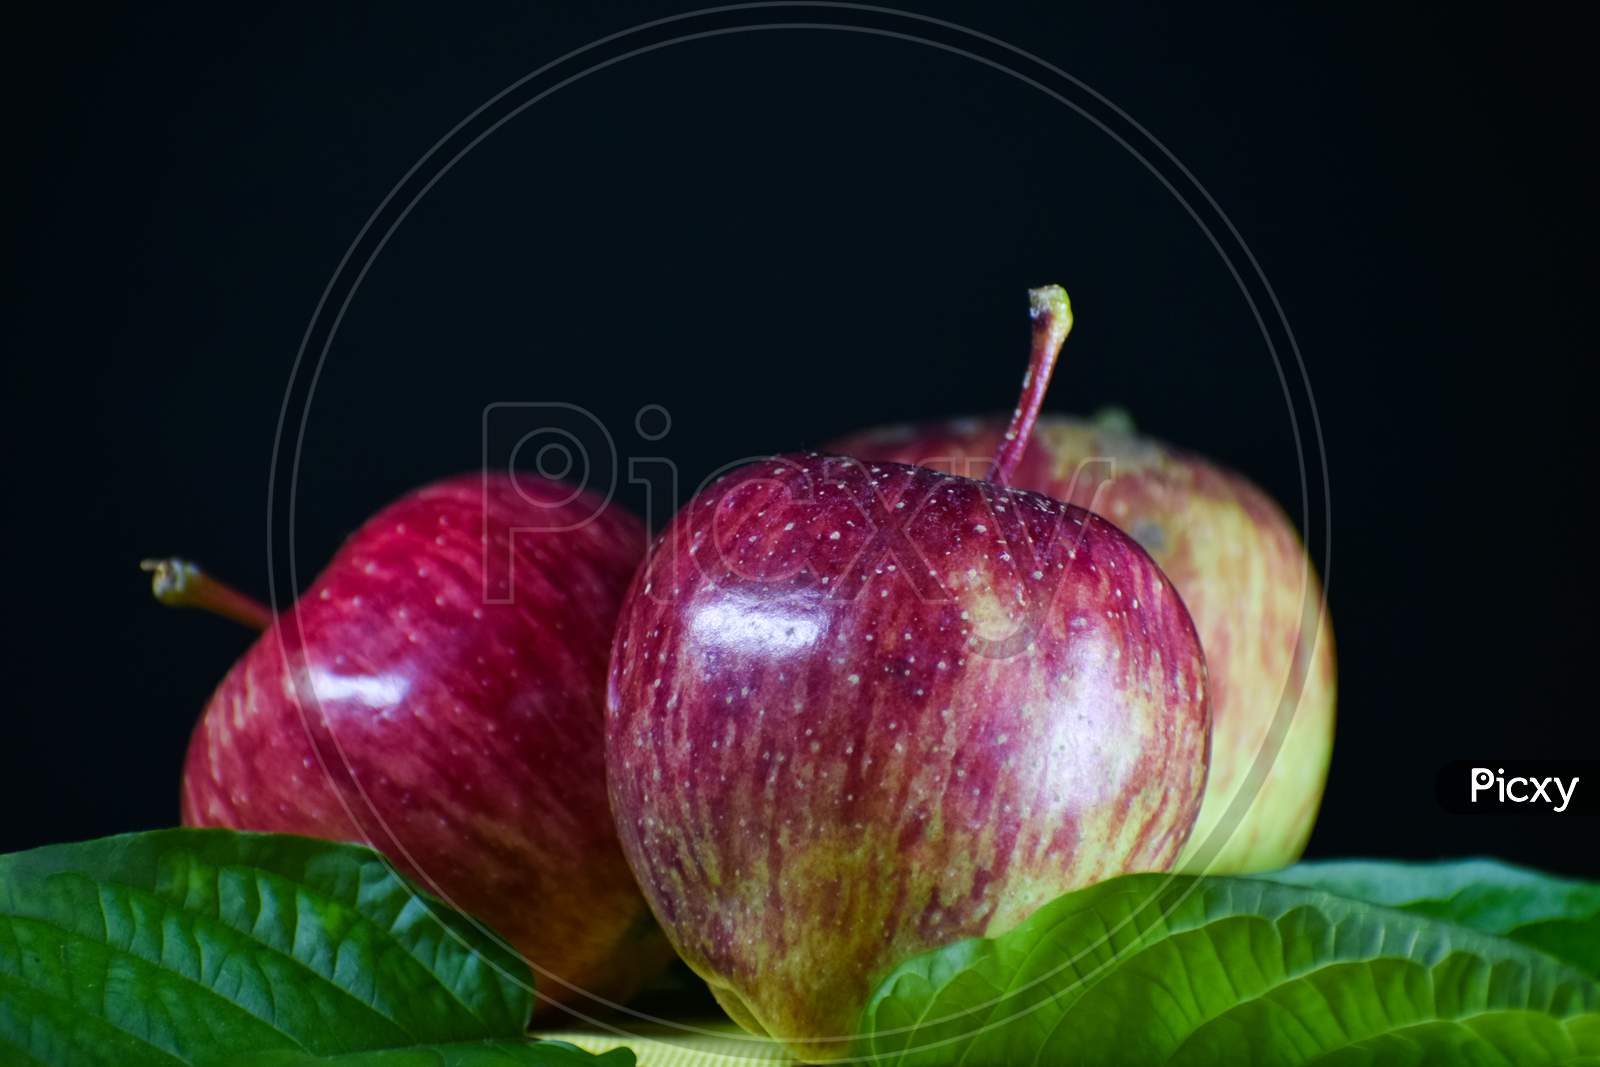 Beautiful Background Image Of An Apple.